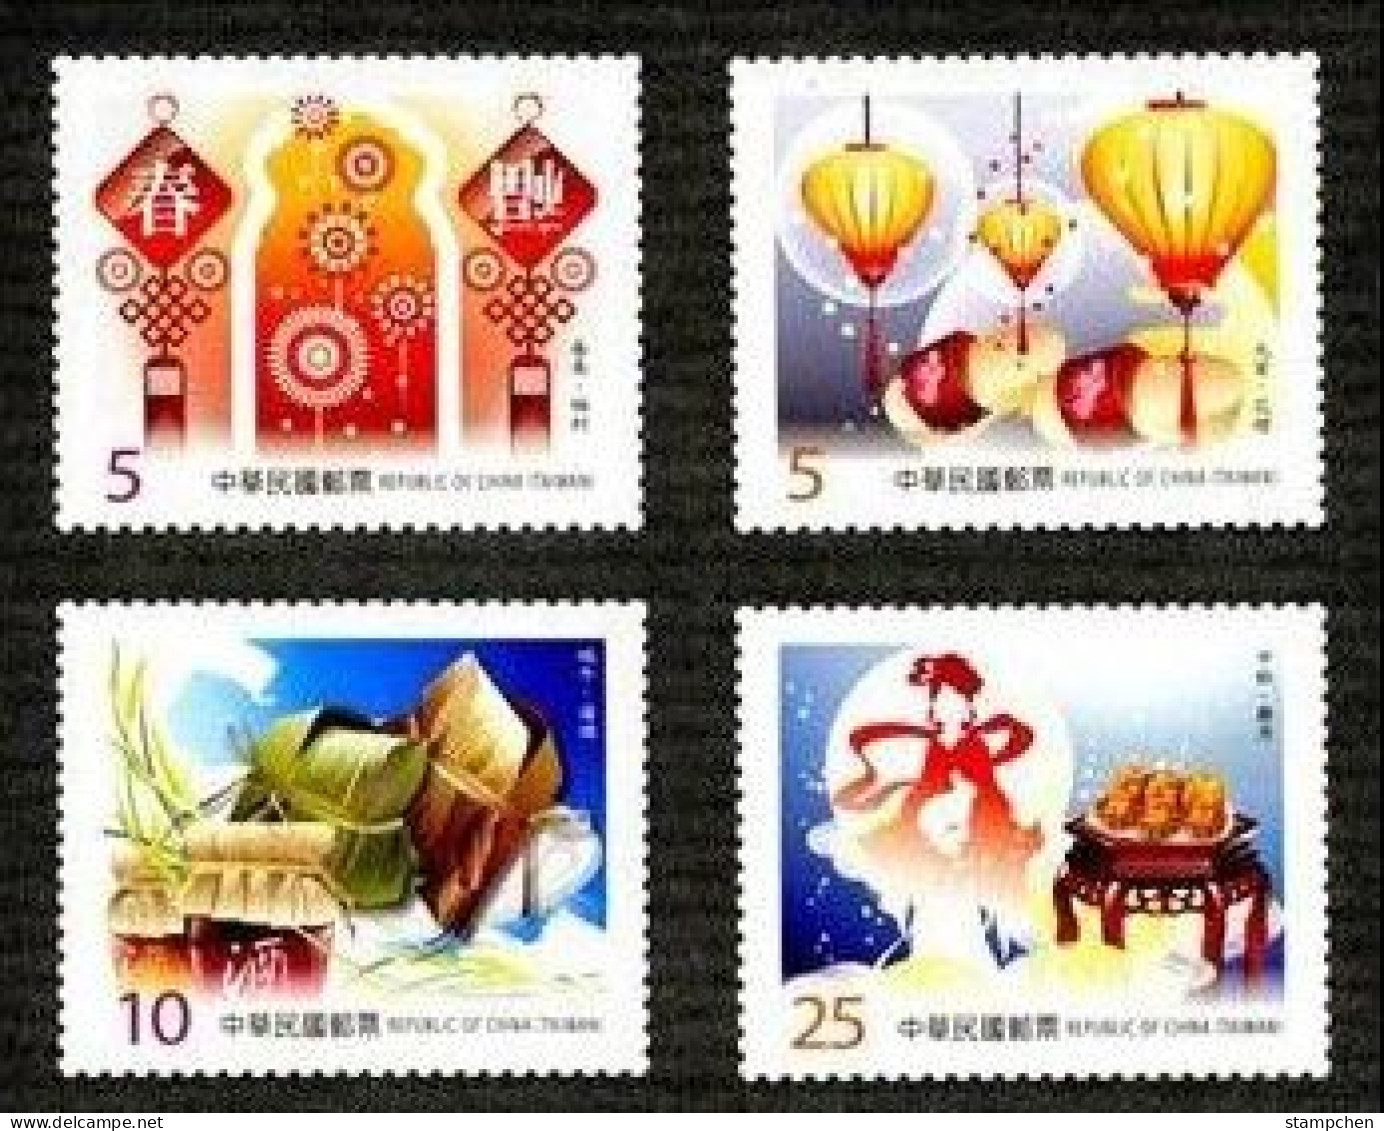 Taiwan 2012 Traditional Festival Stamps New Year Lantern Dragon Boat Moon Firework Rice Wine Insect Hare Autumn Cake - Ongebruikt